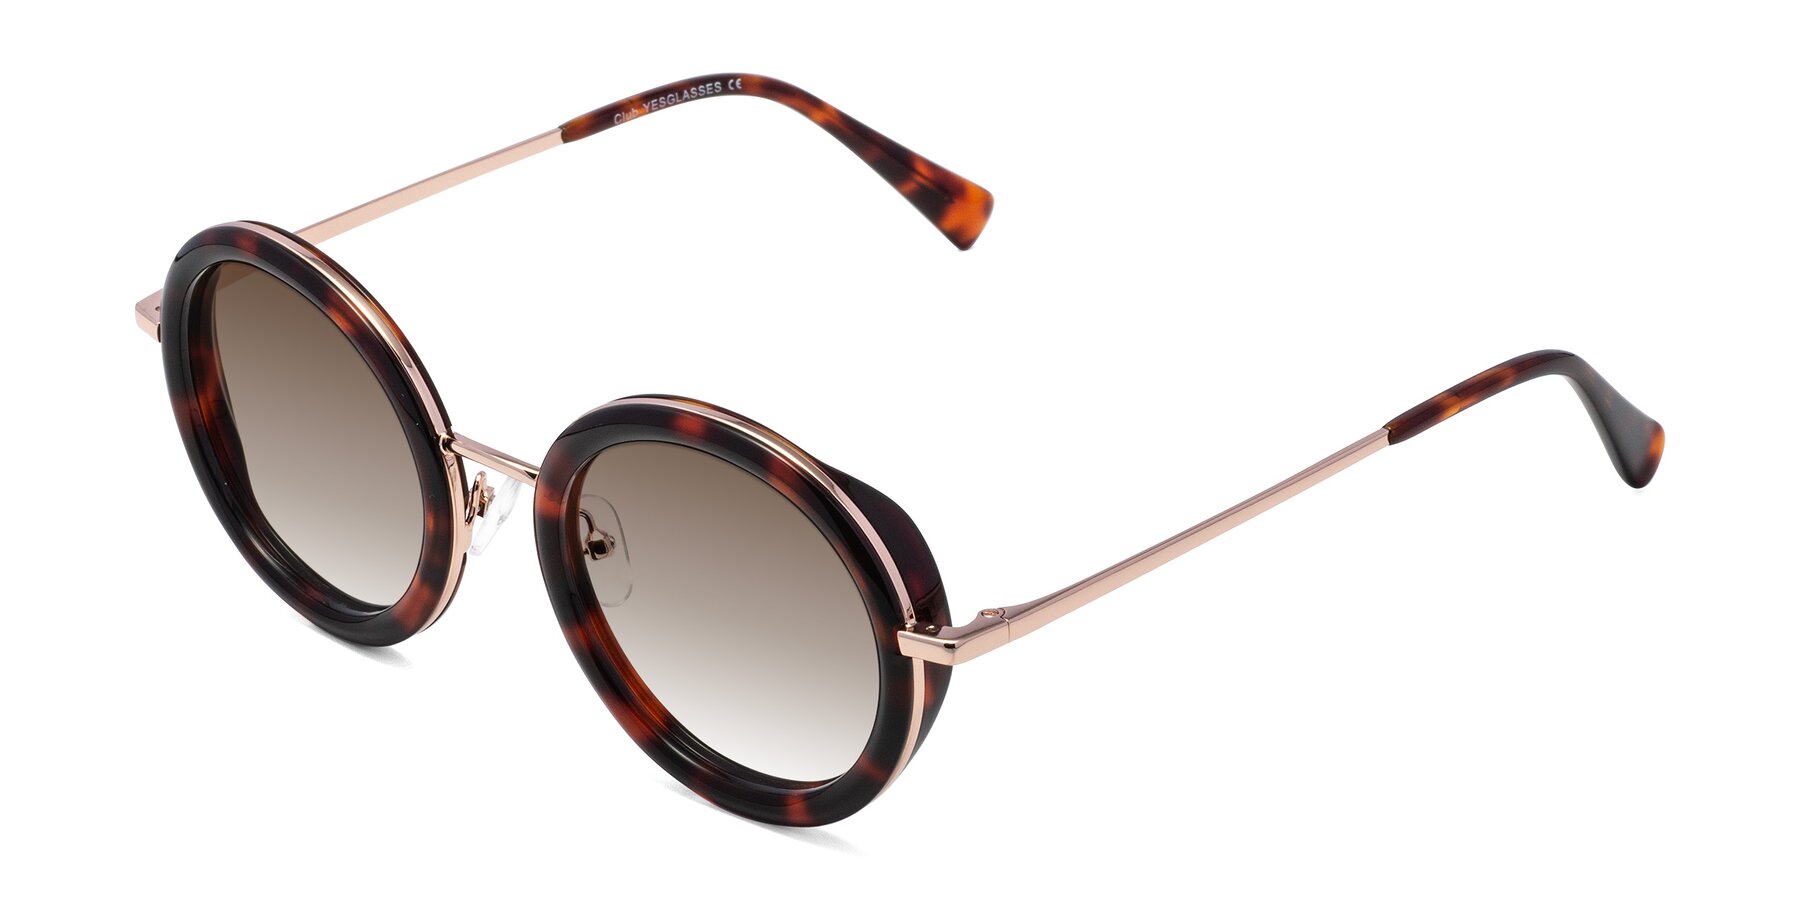 Angle of Club in Tortoise-Rose Gold with Brown Gradient Lenses